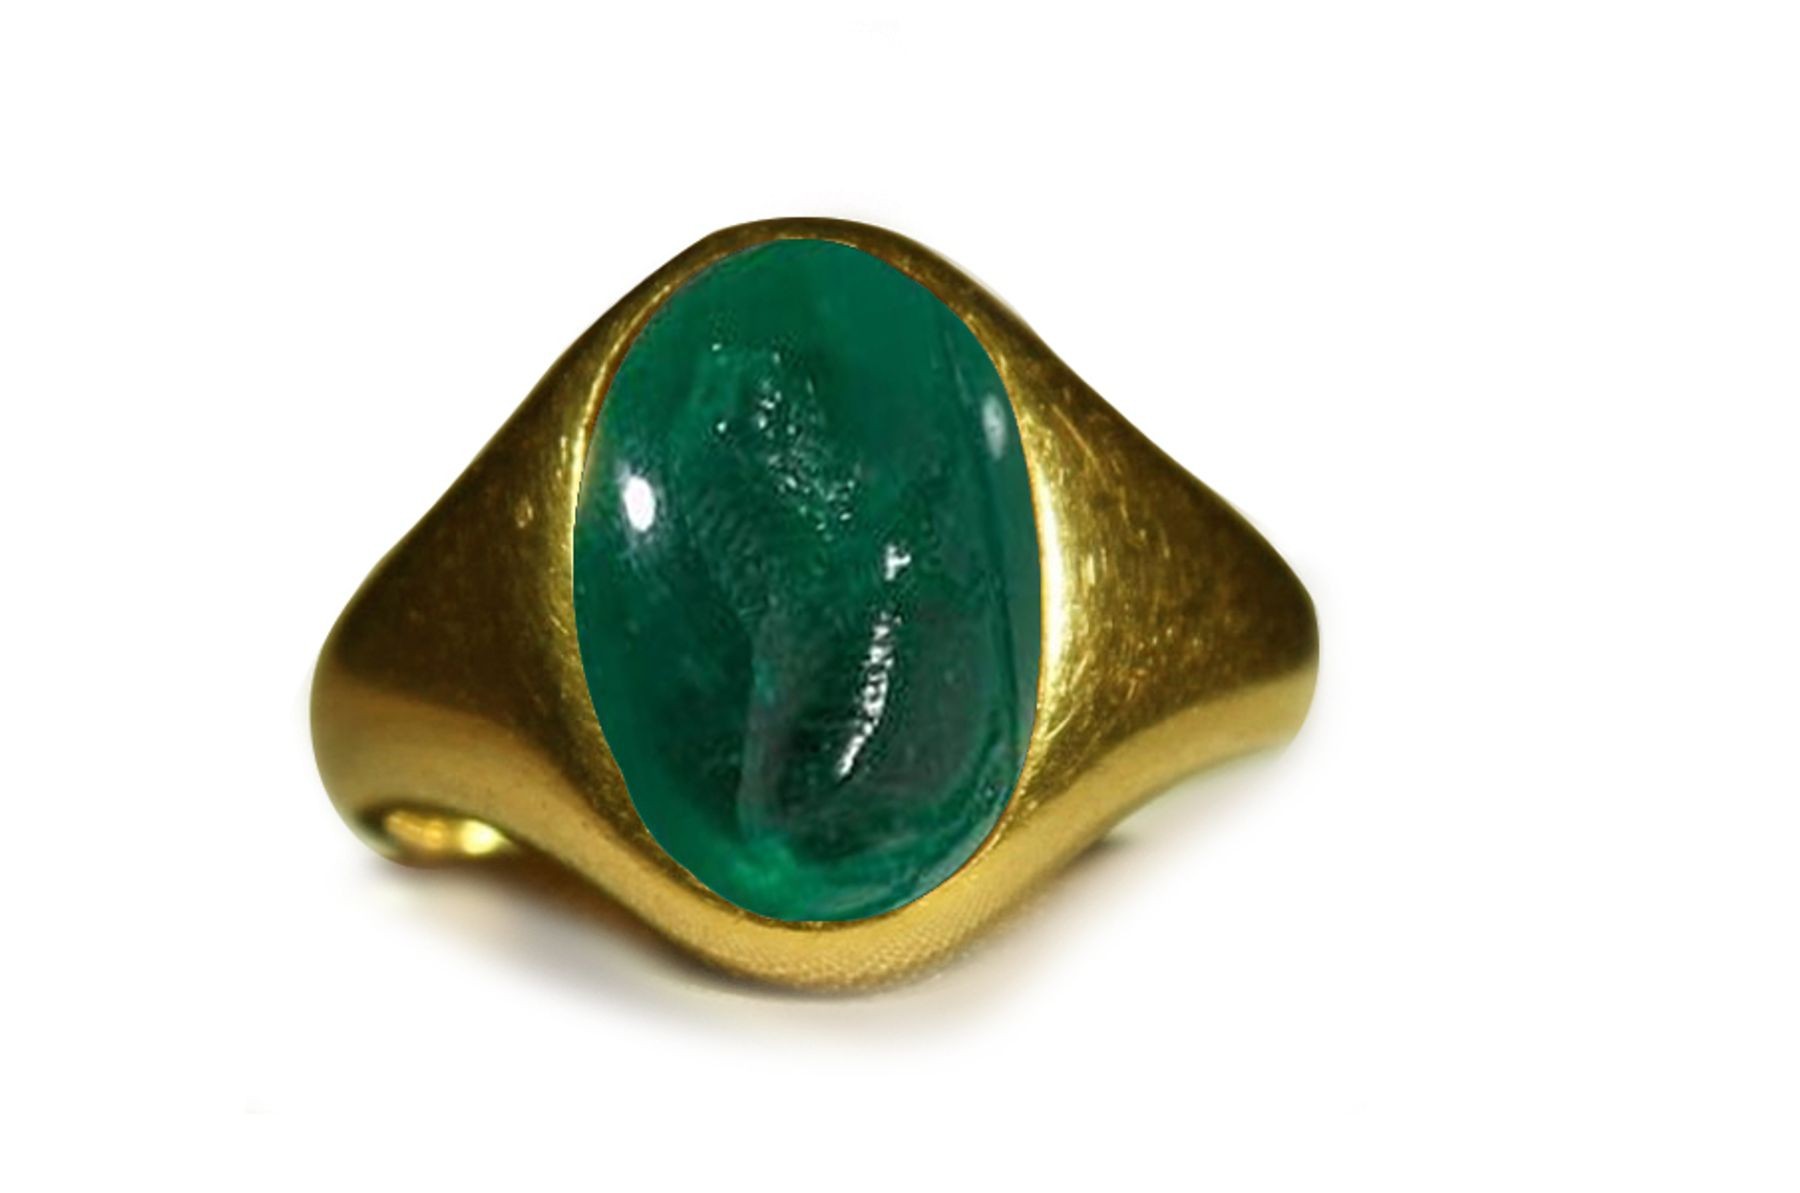 Men's Exclusive Styles Rings: In this Ancient Rich Mountain Green Color & Vibrant Emerald Red Sea in Gold Signet Ring